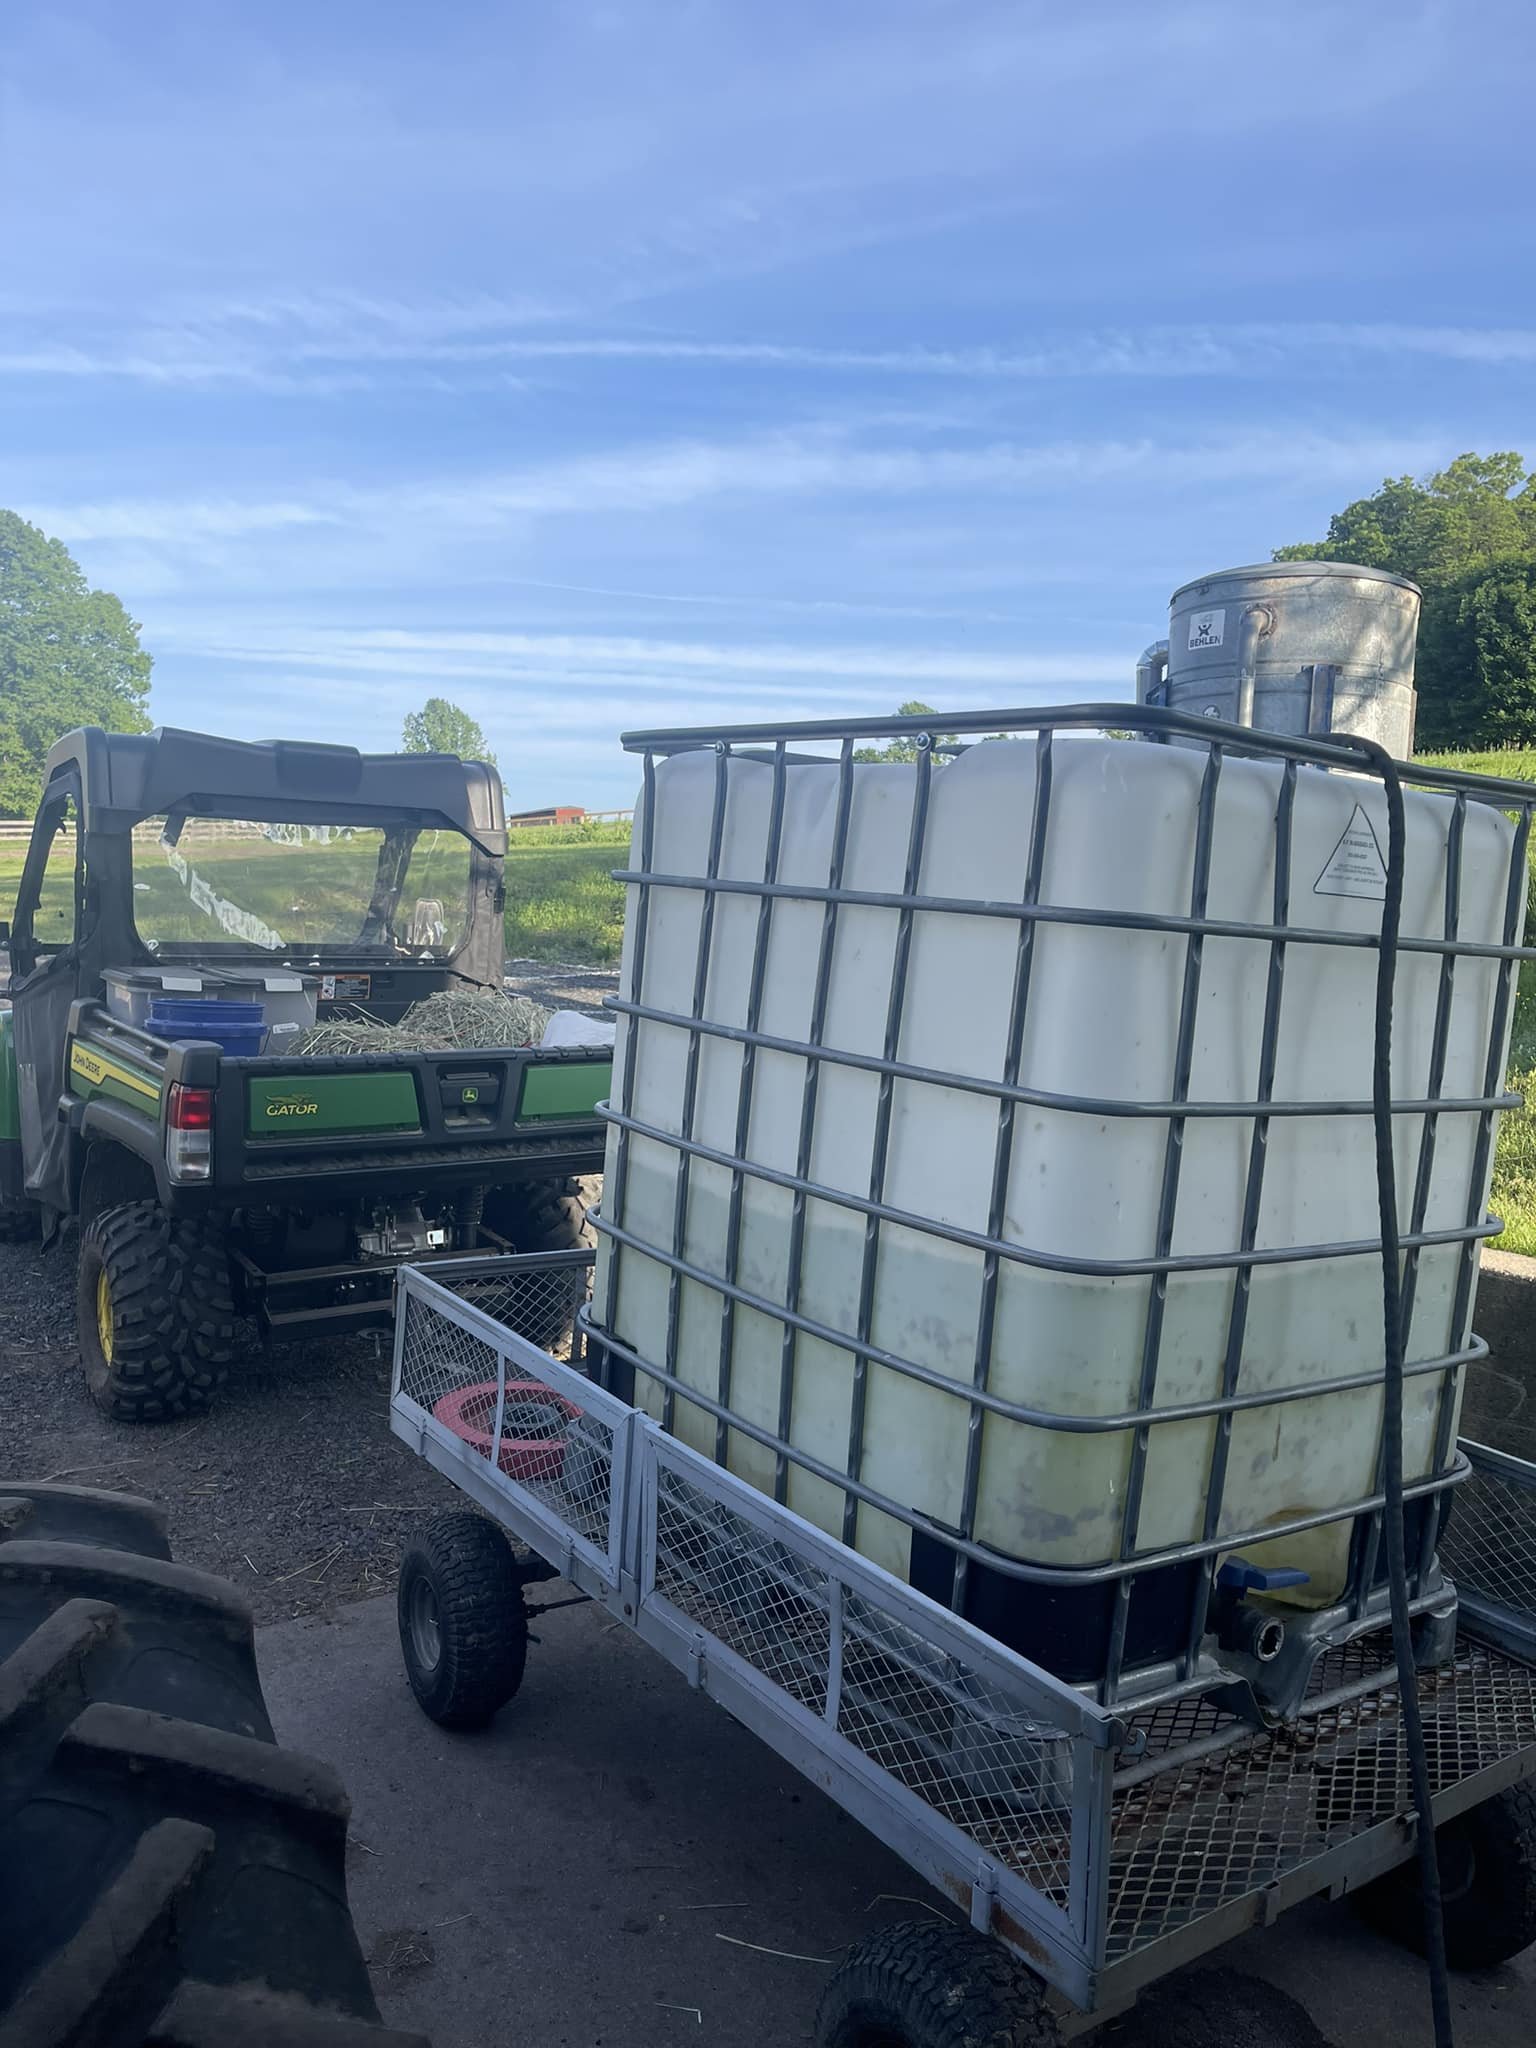 Hot days🔥 makes us thankful to have this water trailer!  This makes filling up the water troughs easy #heatwave #water #watertanks